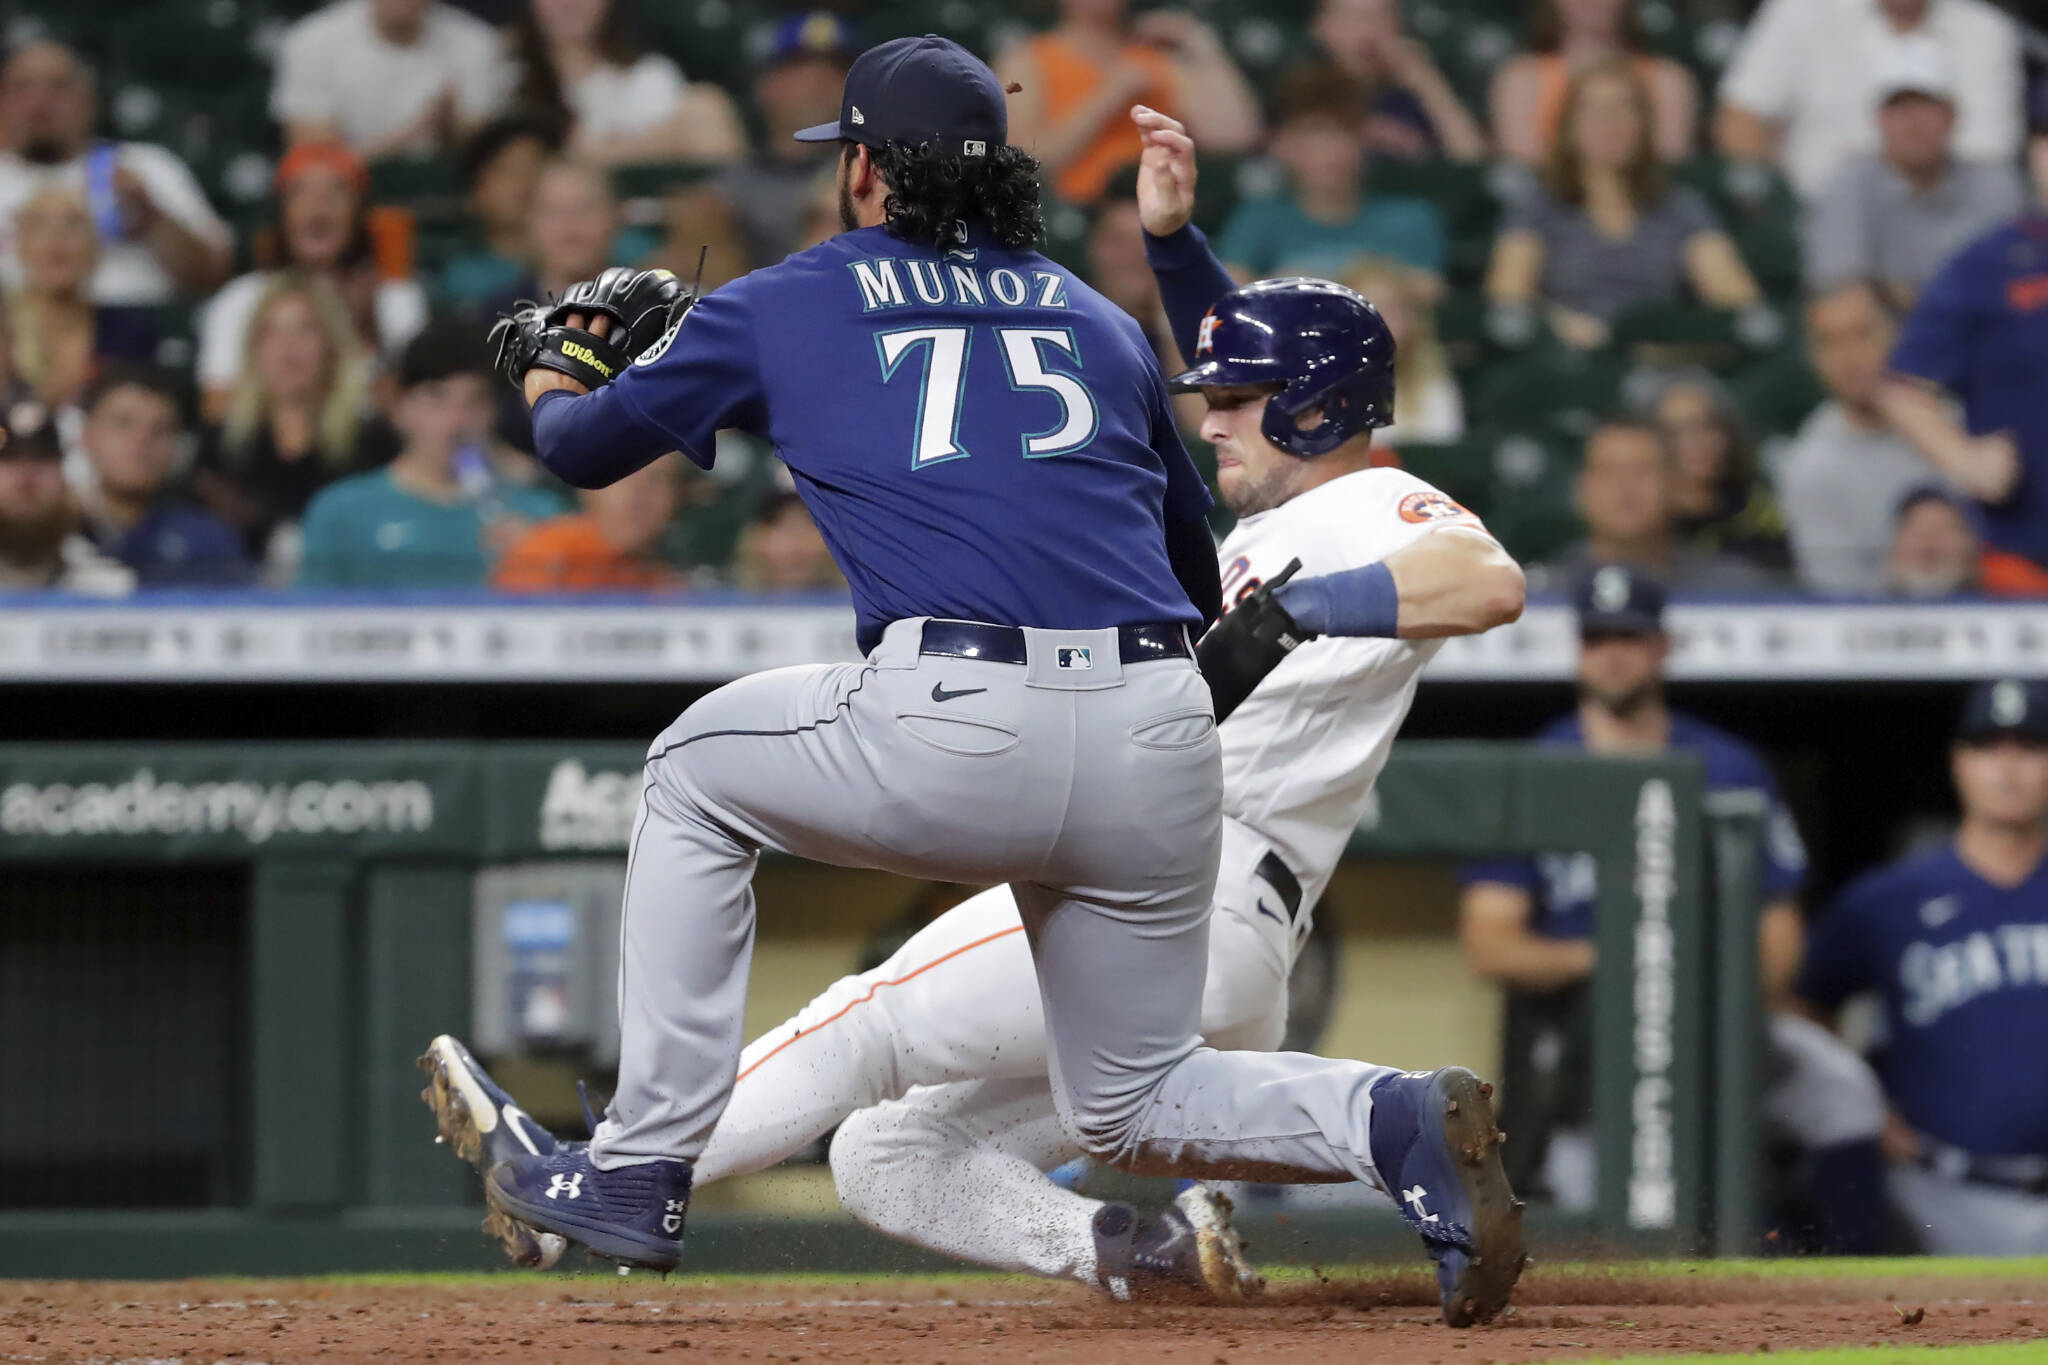 Mariners relief pitcher Andres Munoz (75) runs to home plate after his wild pitch, while the Astros’ Alex Bregman slides to score during the eighth inning of a game Thursday in Houston. (AP Photo/Michael Wyke)